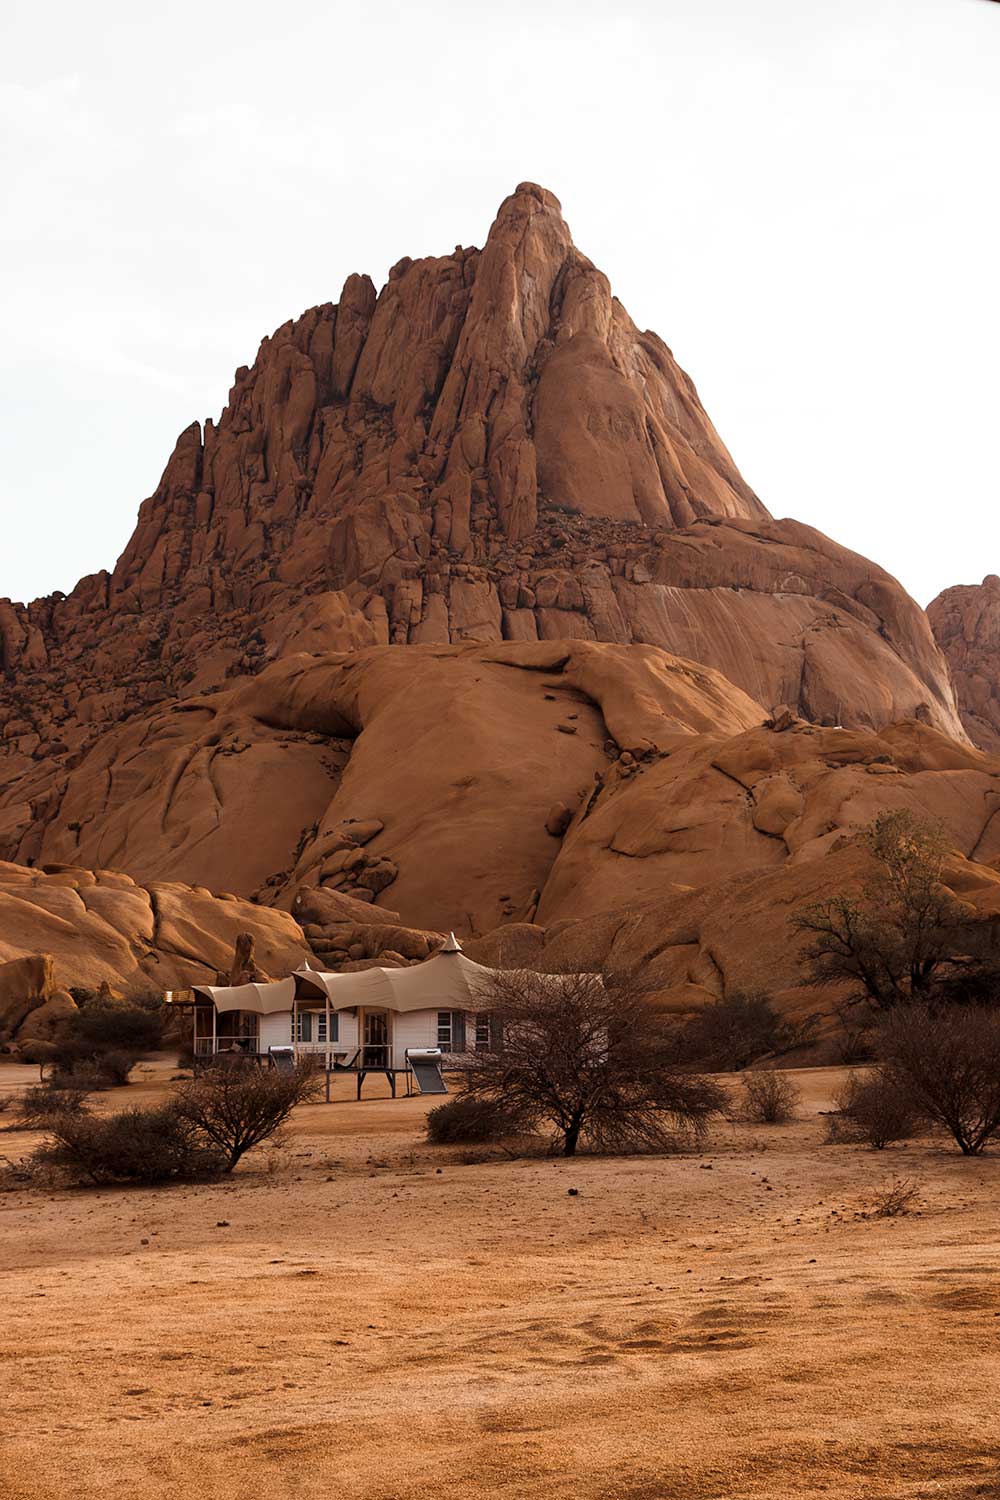 The boho chic clamping accommodations among the boulders of Spitzkoppe Mountain